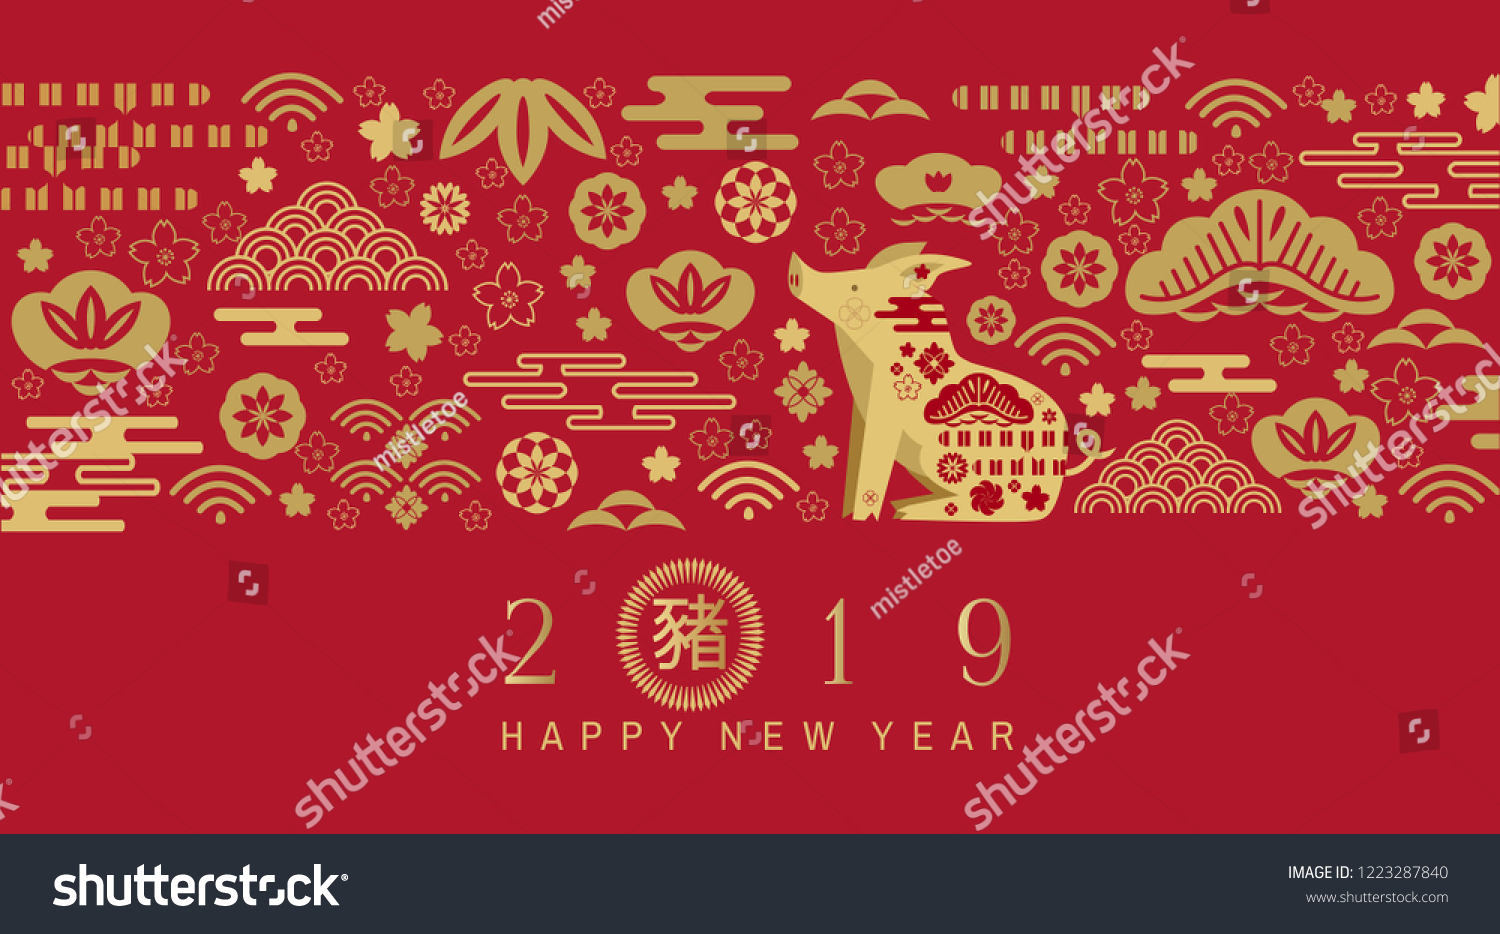 Happy chinese new year.   Pig  - symbol 2019 New Year.  Chinese translation: "Happy New Year".  Template banner, poster, greeting cards.  Fan, boar, cloud, lantern, pig,  sakura.  Vector illustration. #1223287840